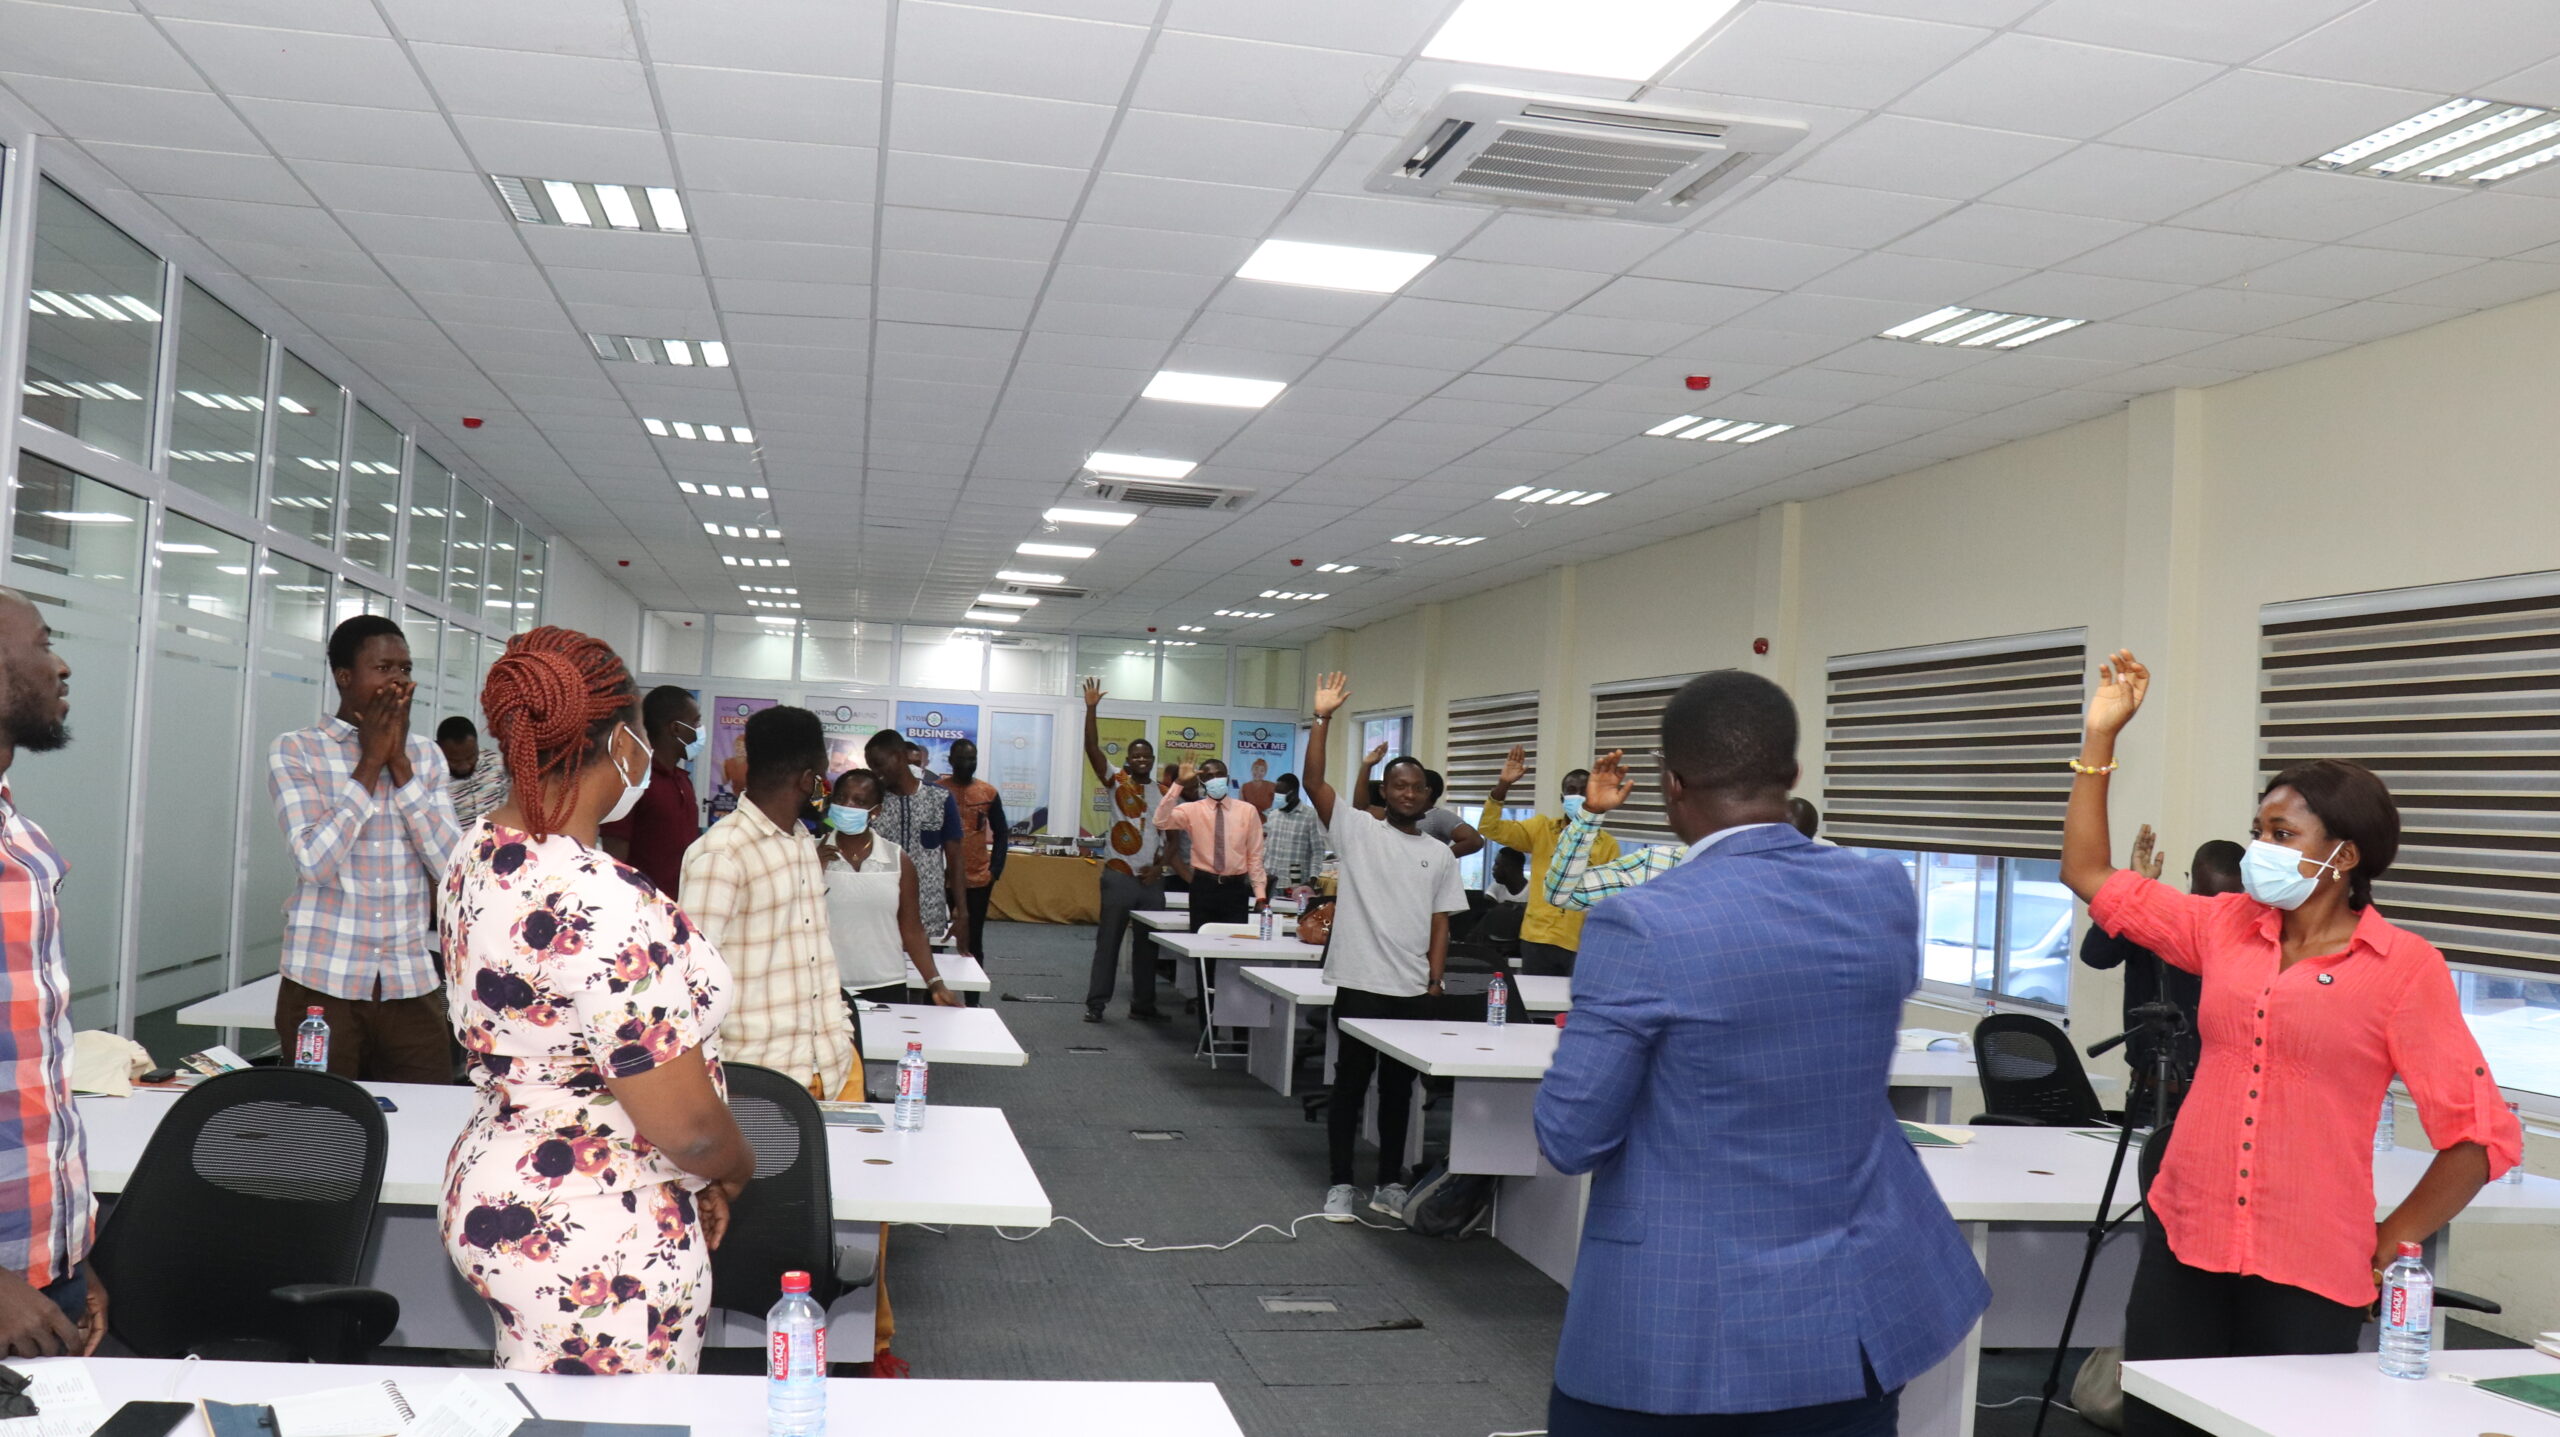 Beyond Covid-19 crisis hackathon by enpact Ghana took place at Accra Digital Centre.